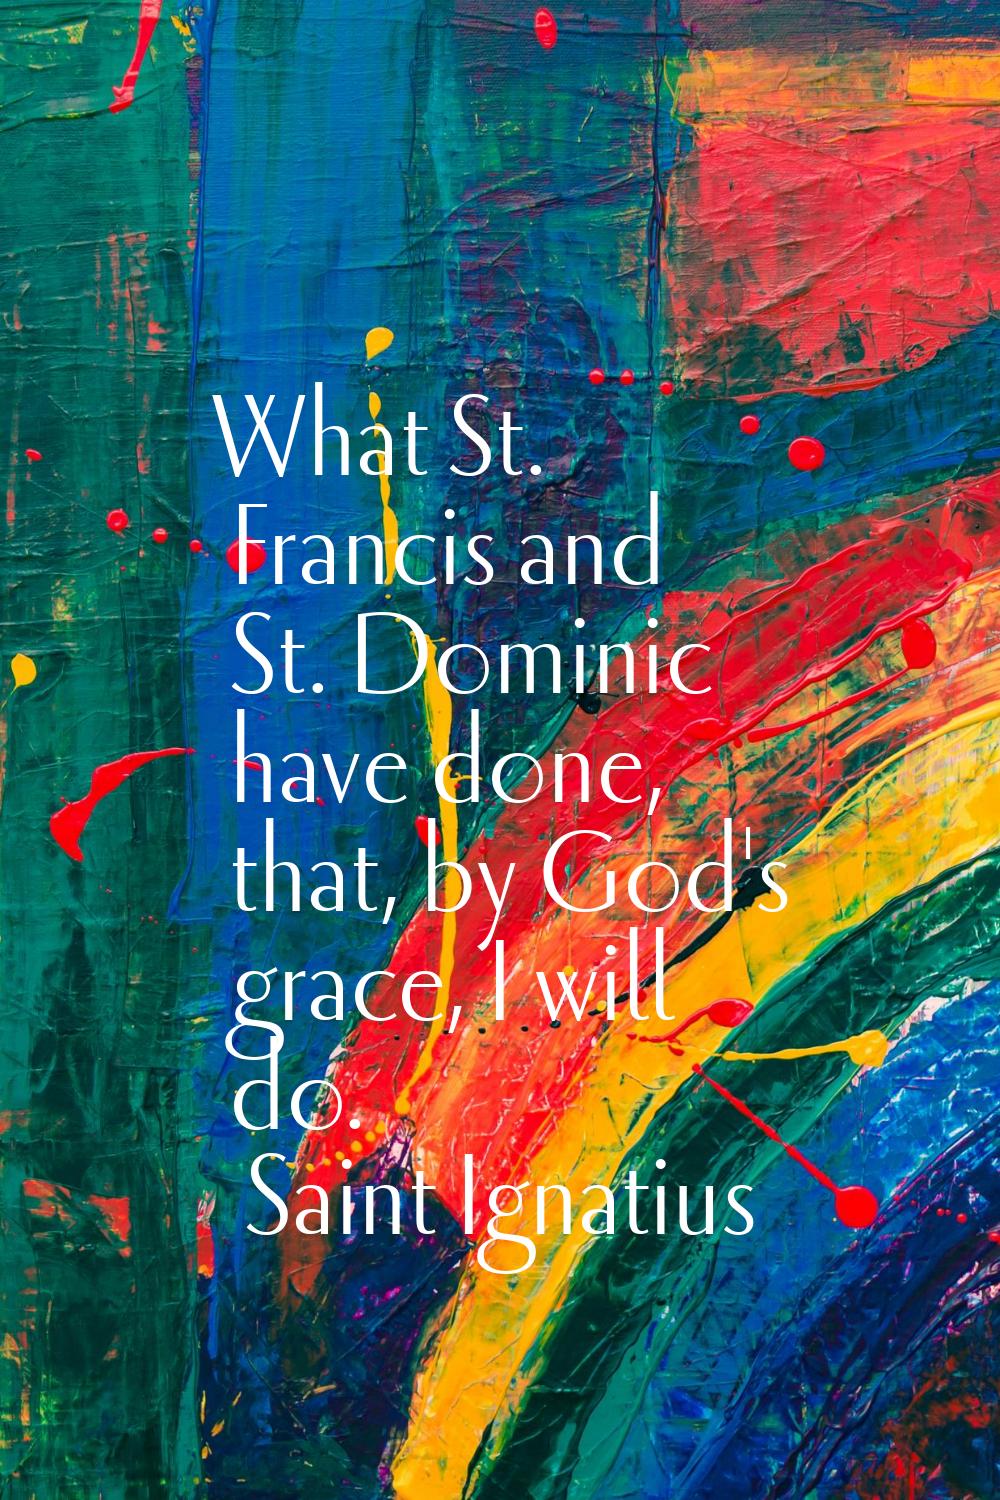 What St. Francis and St. Dominic have done, that, by God's grace, I will do.